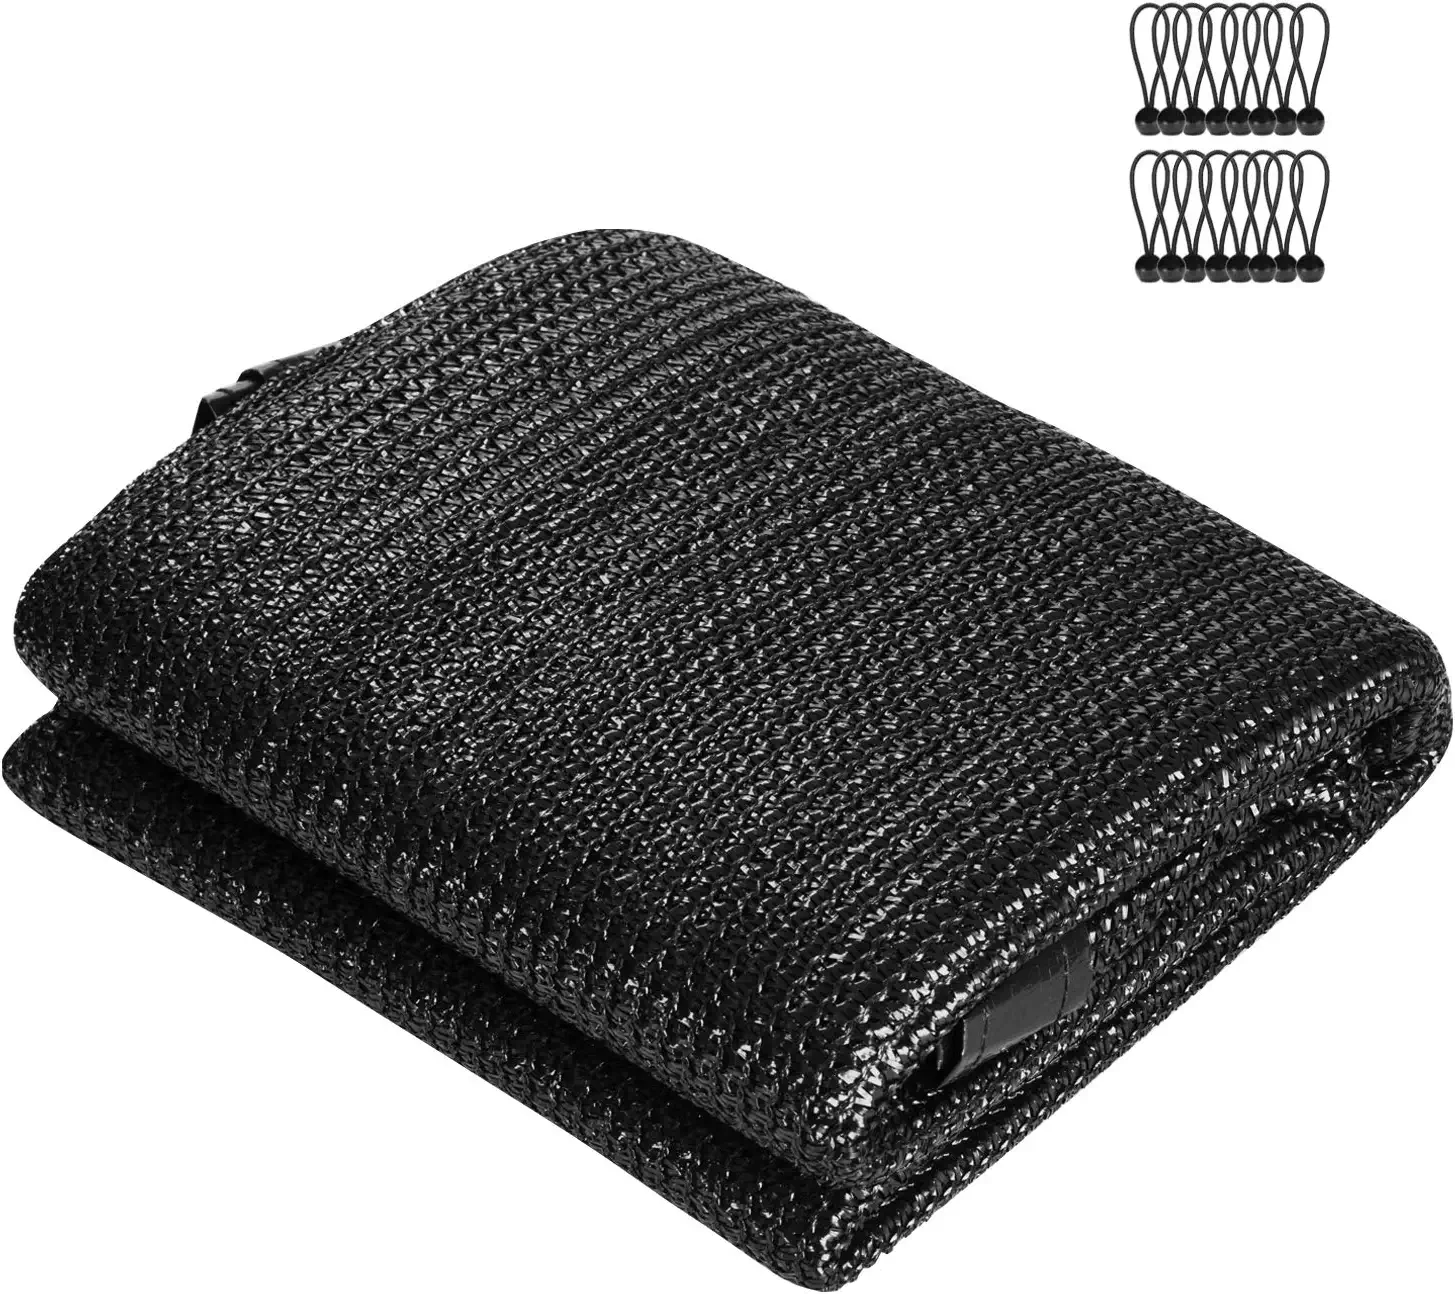 VIVOSUN Sunblock Shade Cloth, 50%-60% Shade Net, 6.5' x 20' Black Garden Shade Mesh with Grommets for Plant Covers, Swimming Pools, Patios, and Yards